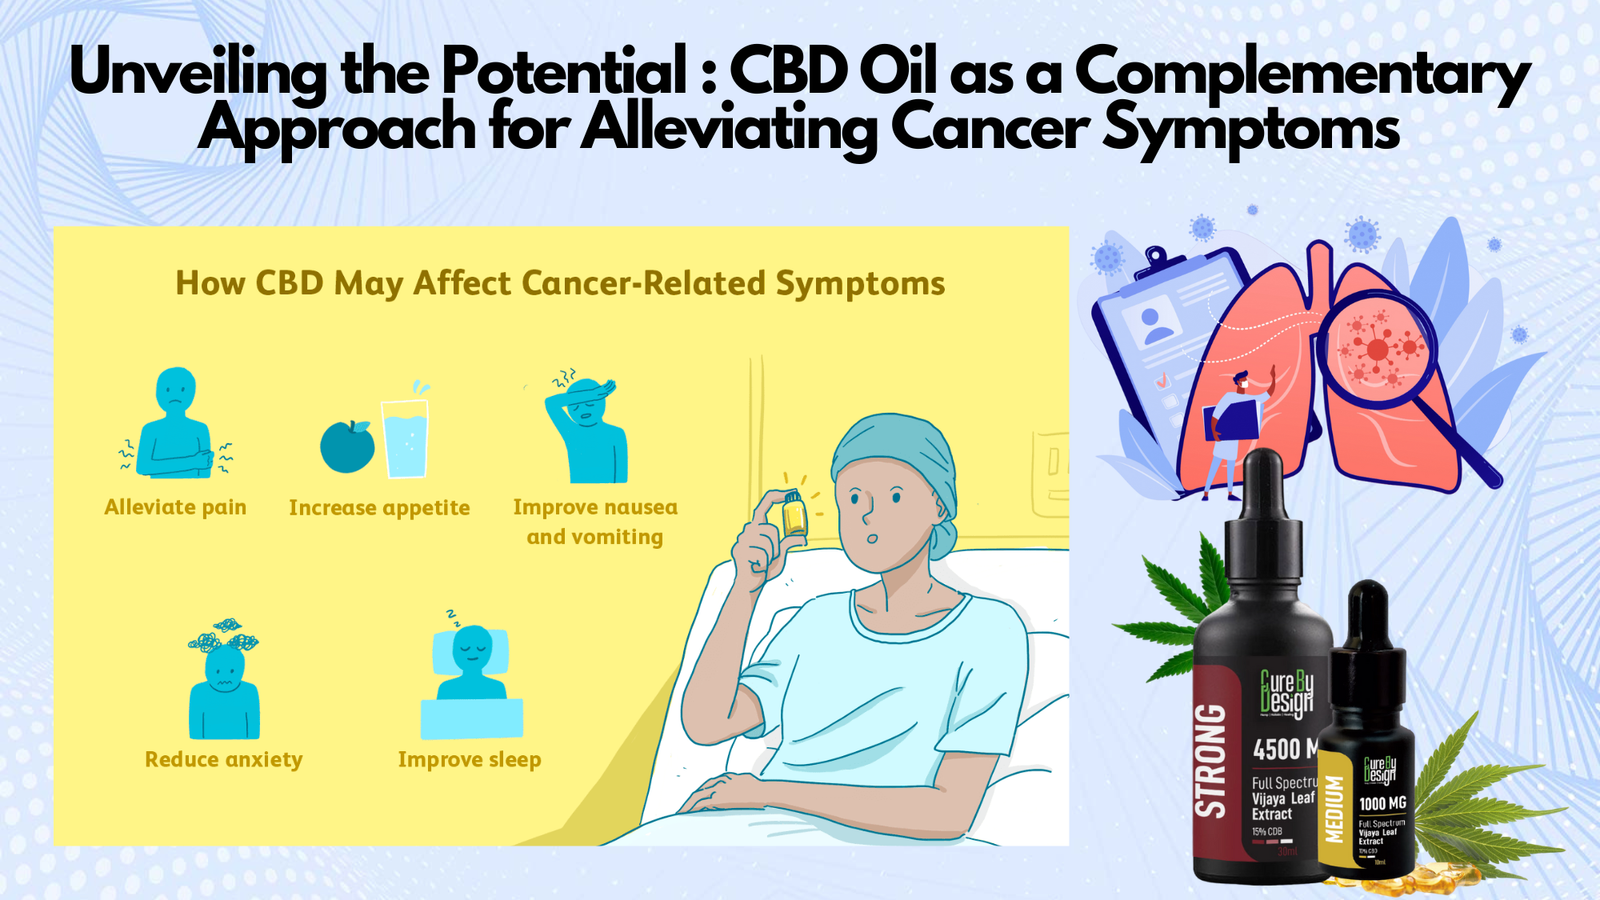 Unveiling the Potential: CBD Oil as a Complementary Approach for Alleviating Cancer Symptoms